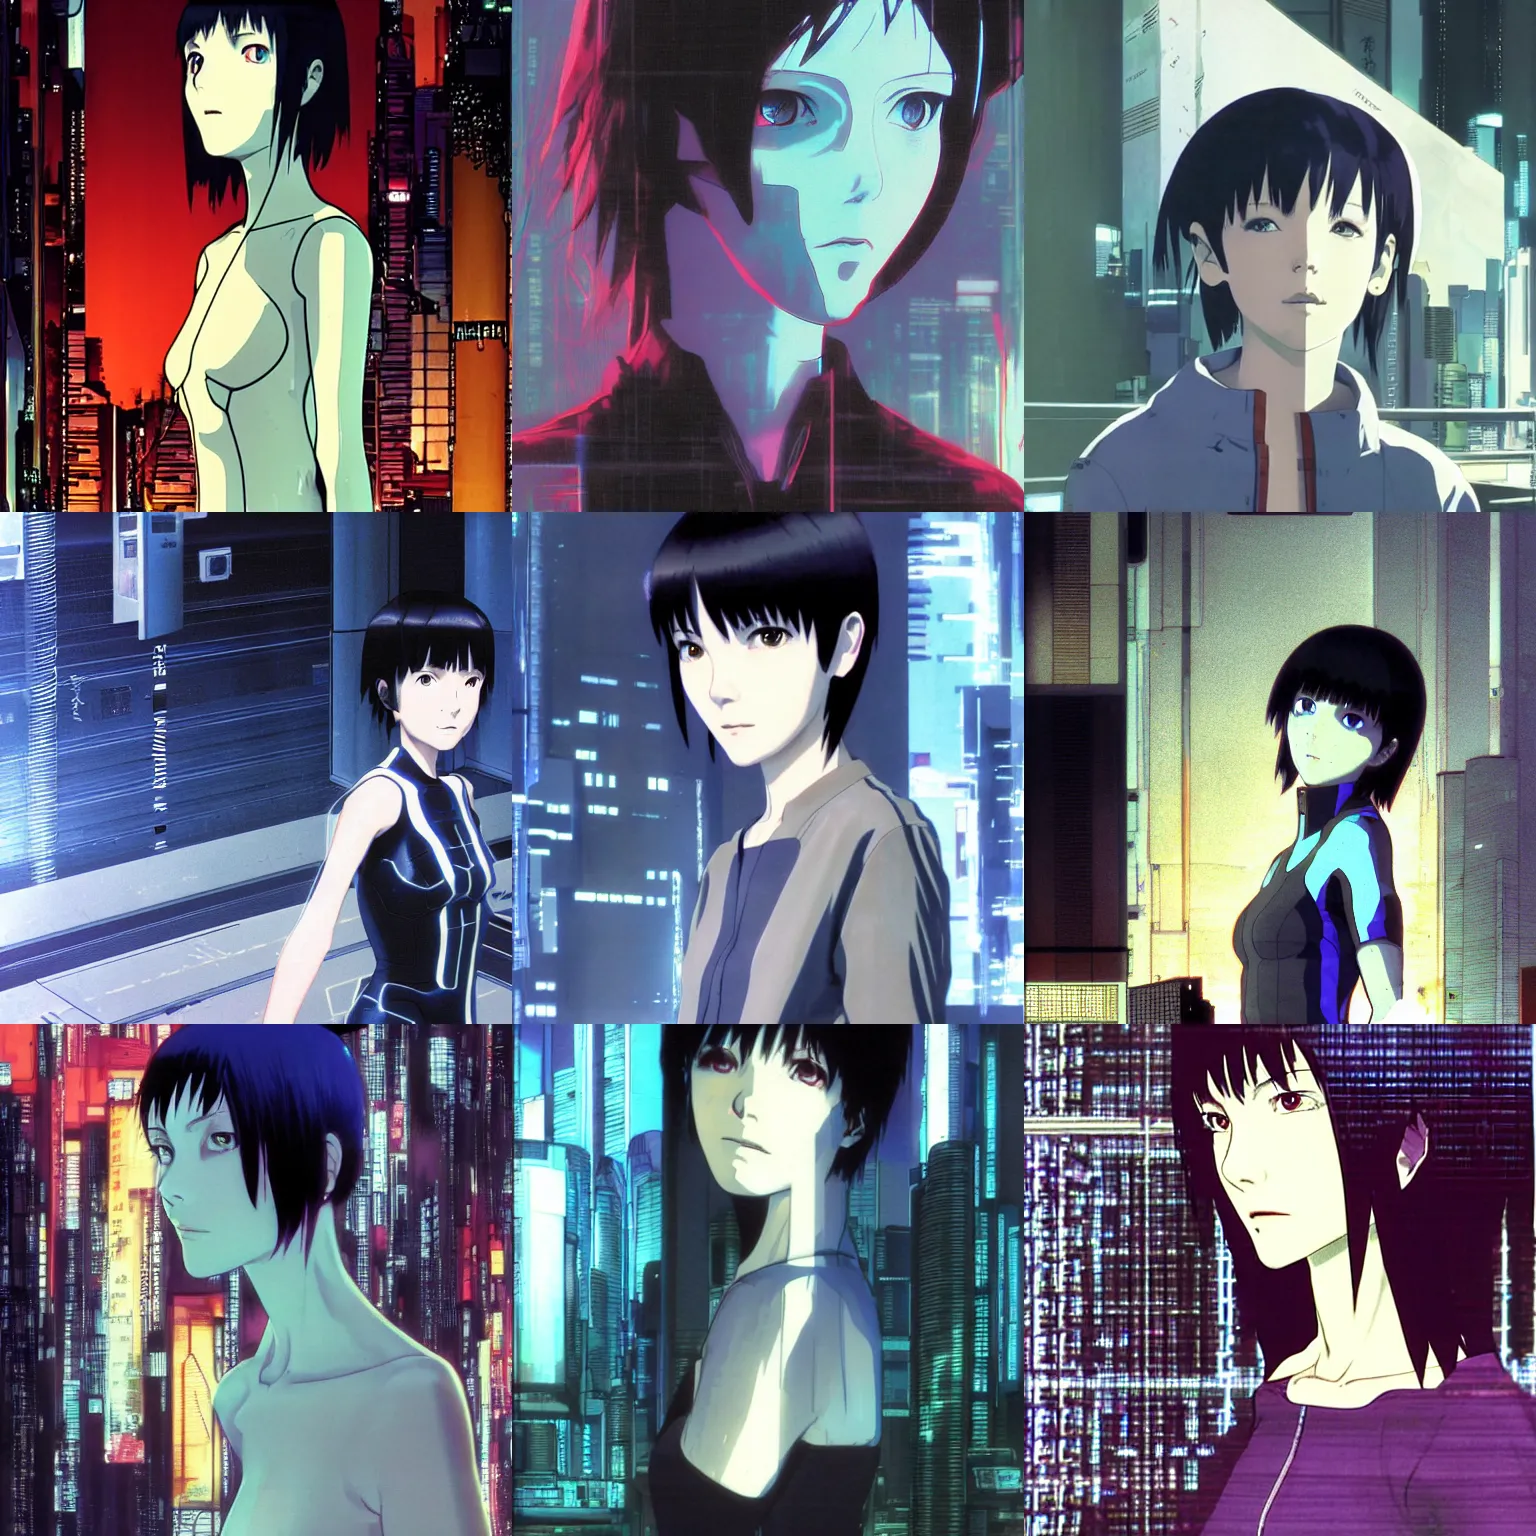 Prompt: glitch ghost in the shell lain portrait by makoto shinkai, chaotic computers concept art by syd mead